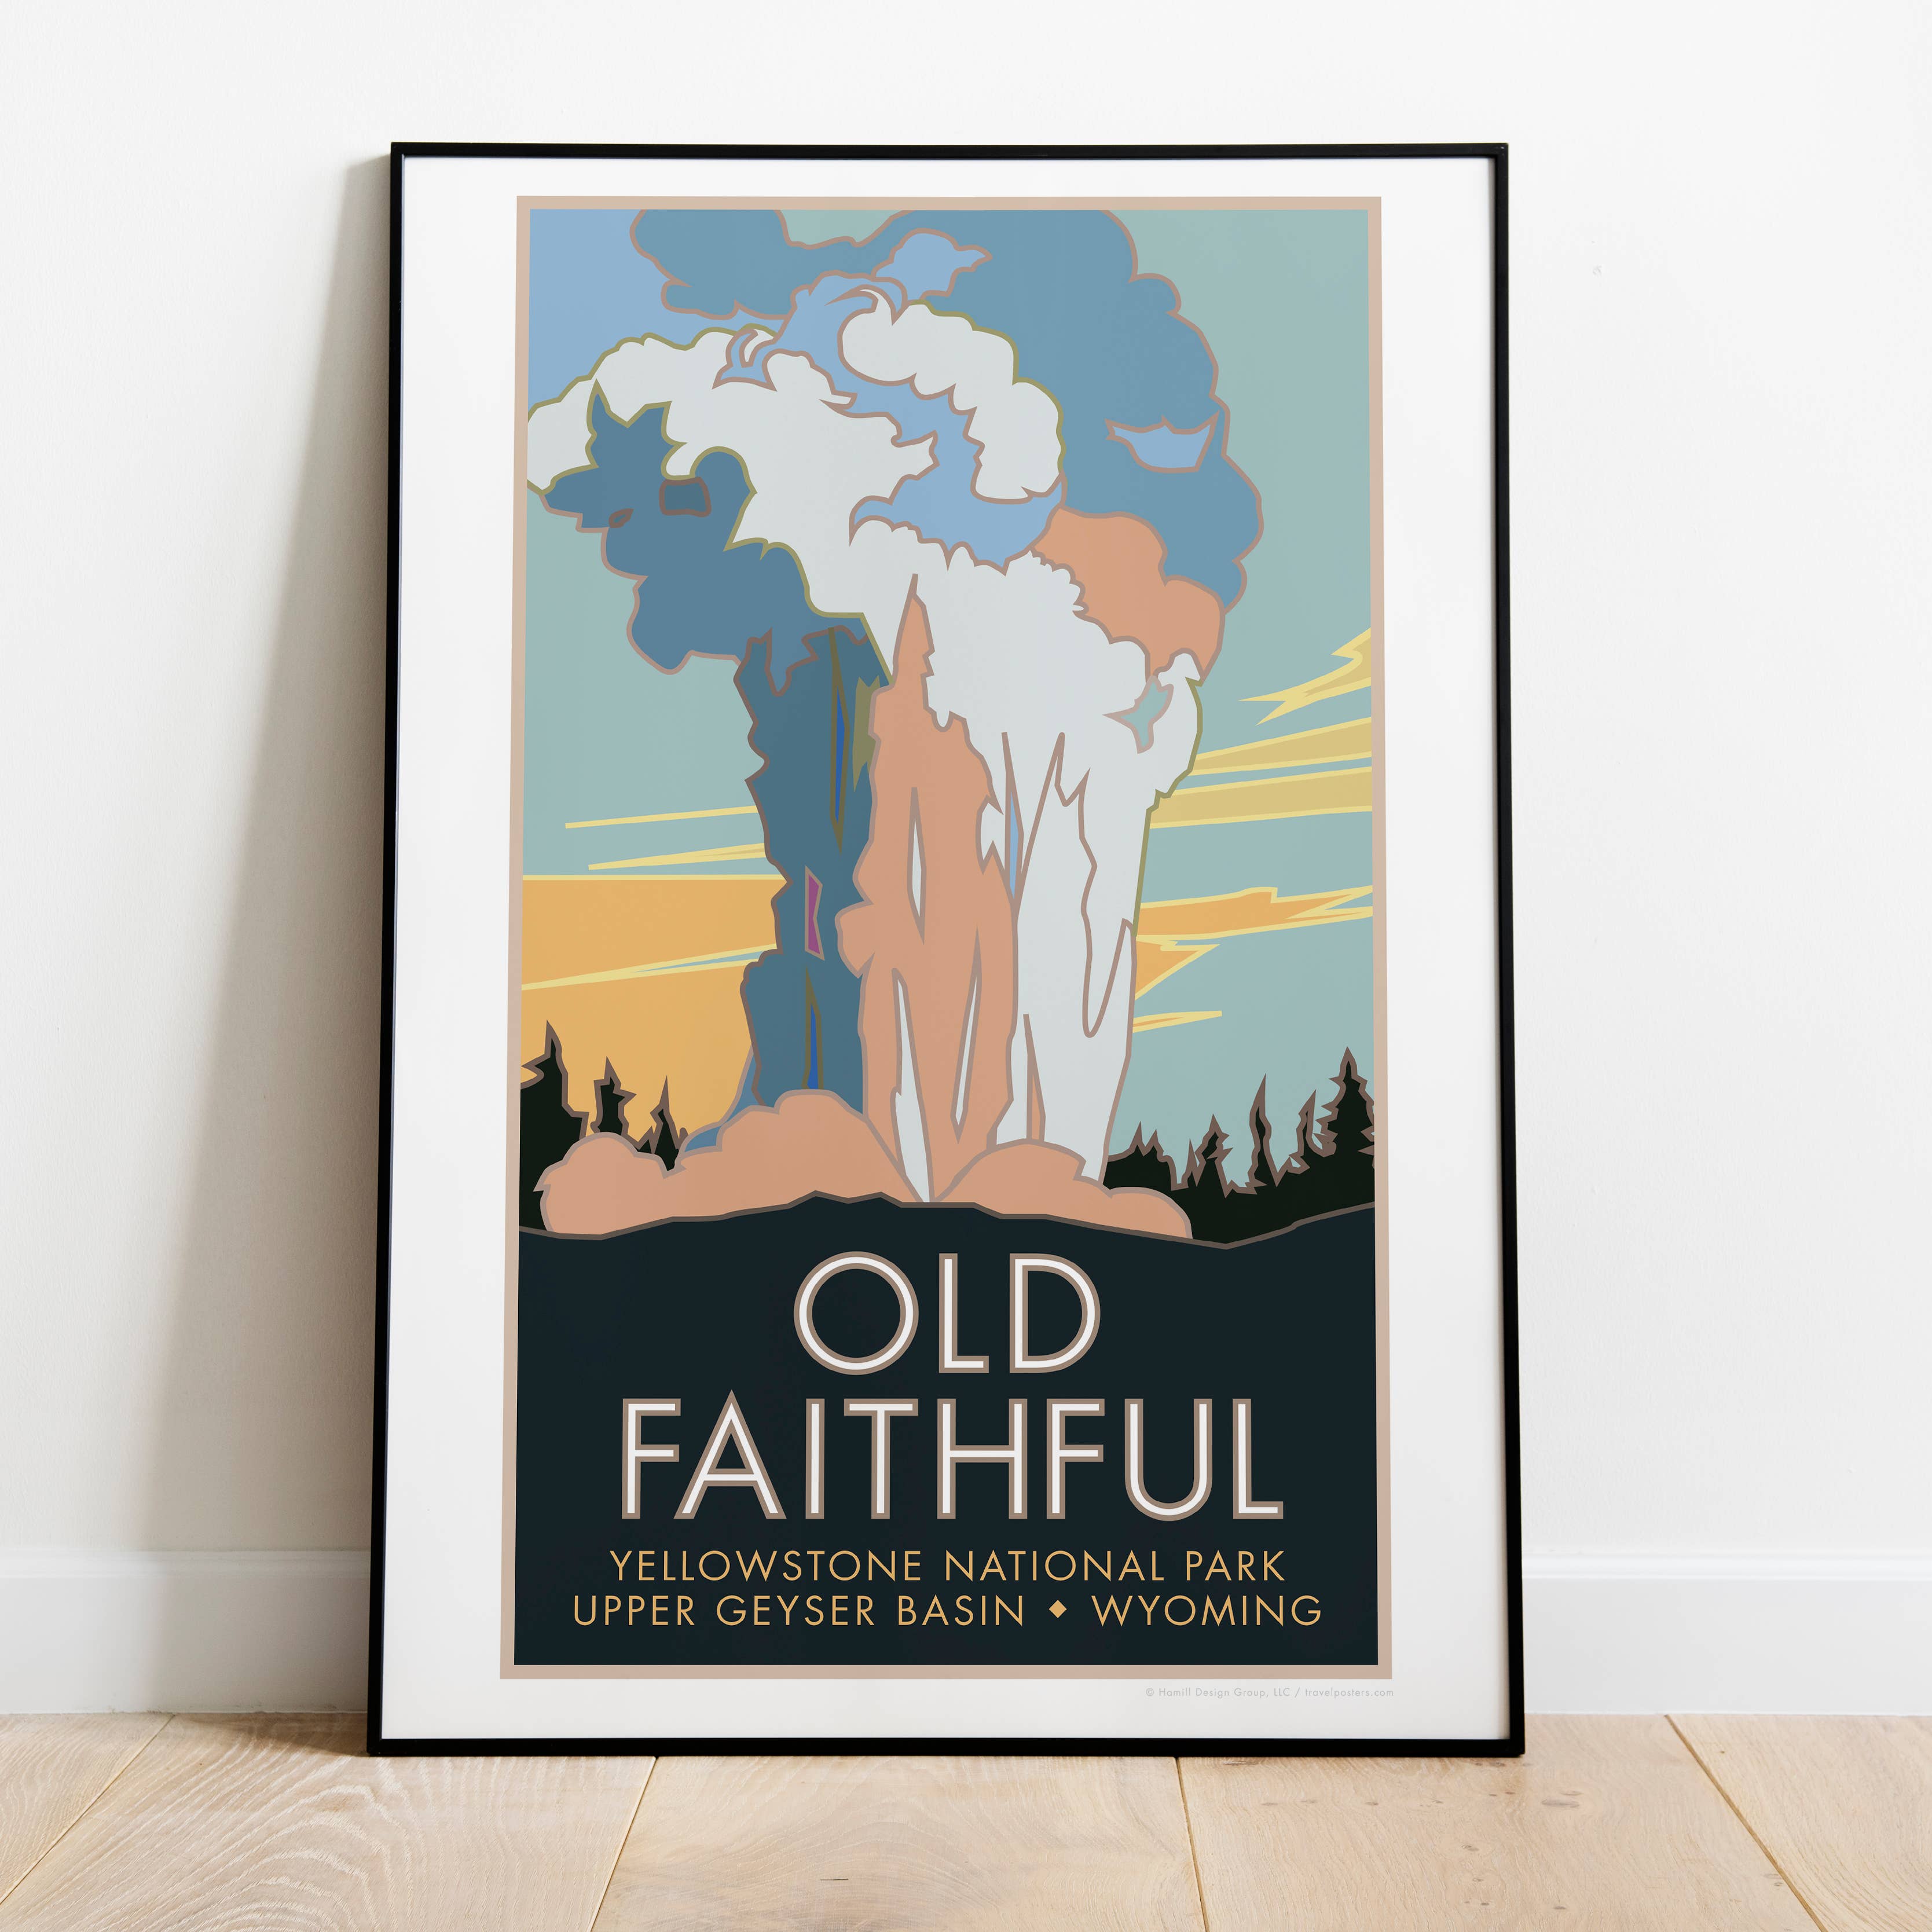 Old Faithful Yellowstone National Park Poster